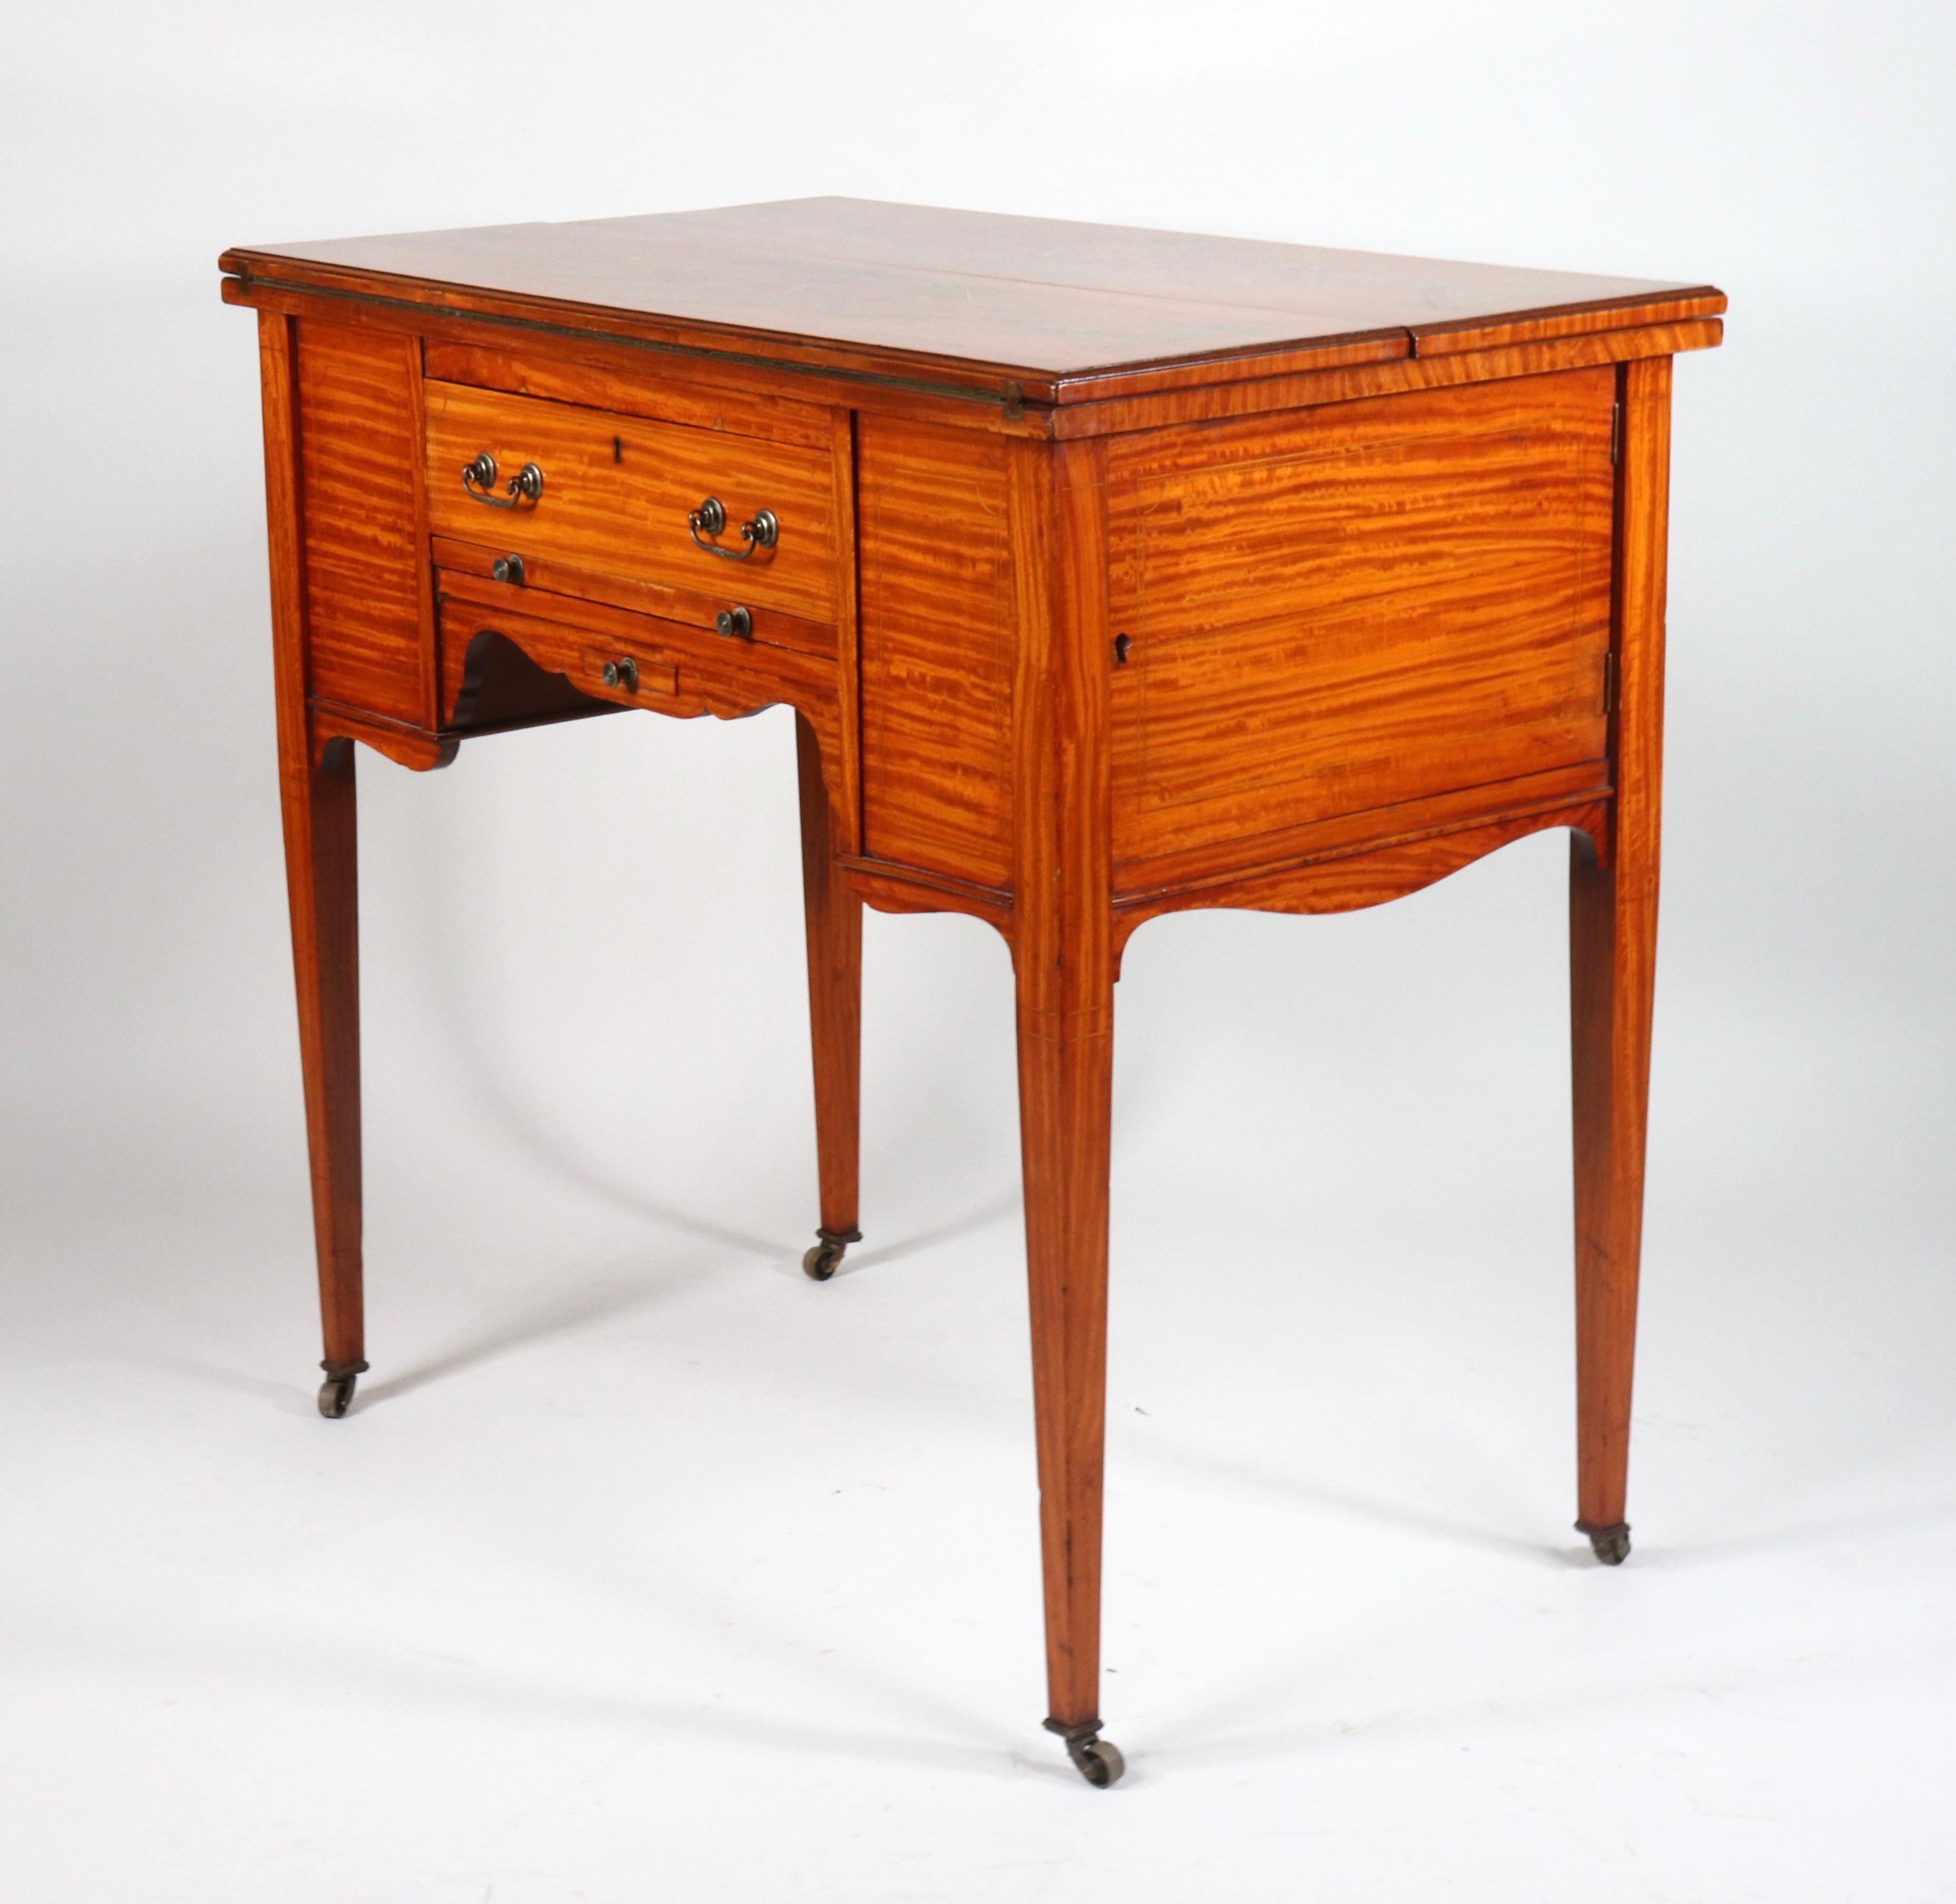 This magnificent Circa 1910 Edwardian Satinwood hand-painted game table displays signs of fine craftsmanship and ingenuity. From the 17th to the 19th Century, card and board games were means to socialize and gamble large sums of money among the